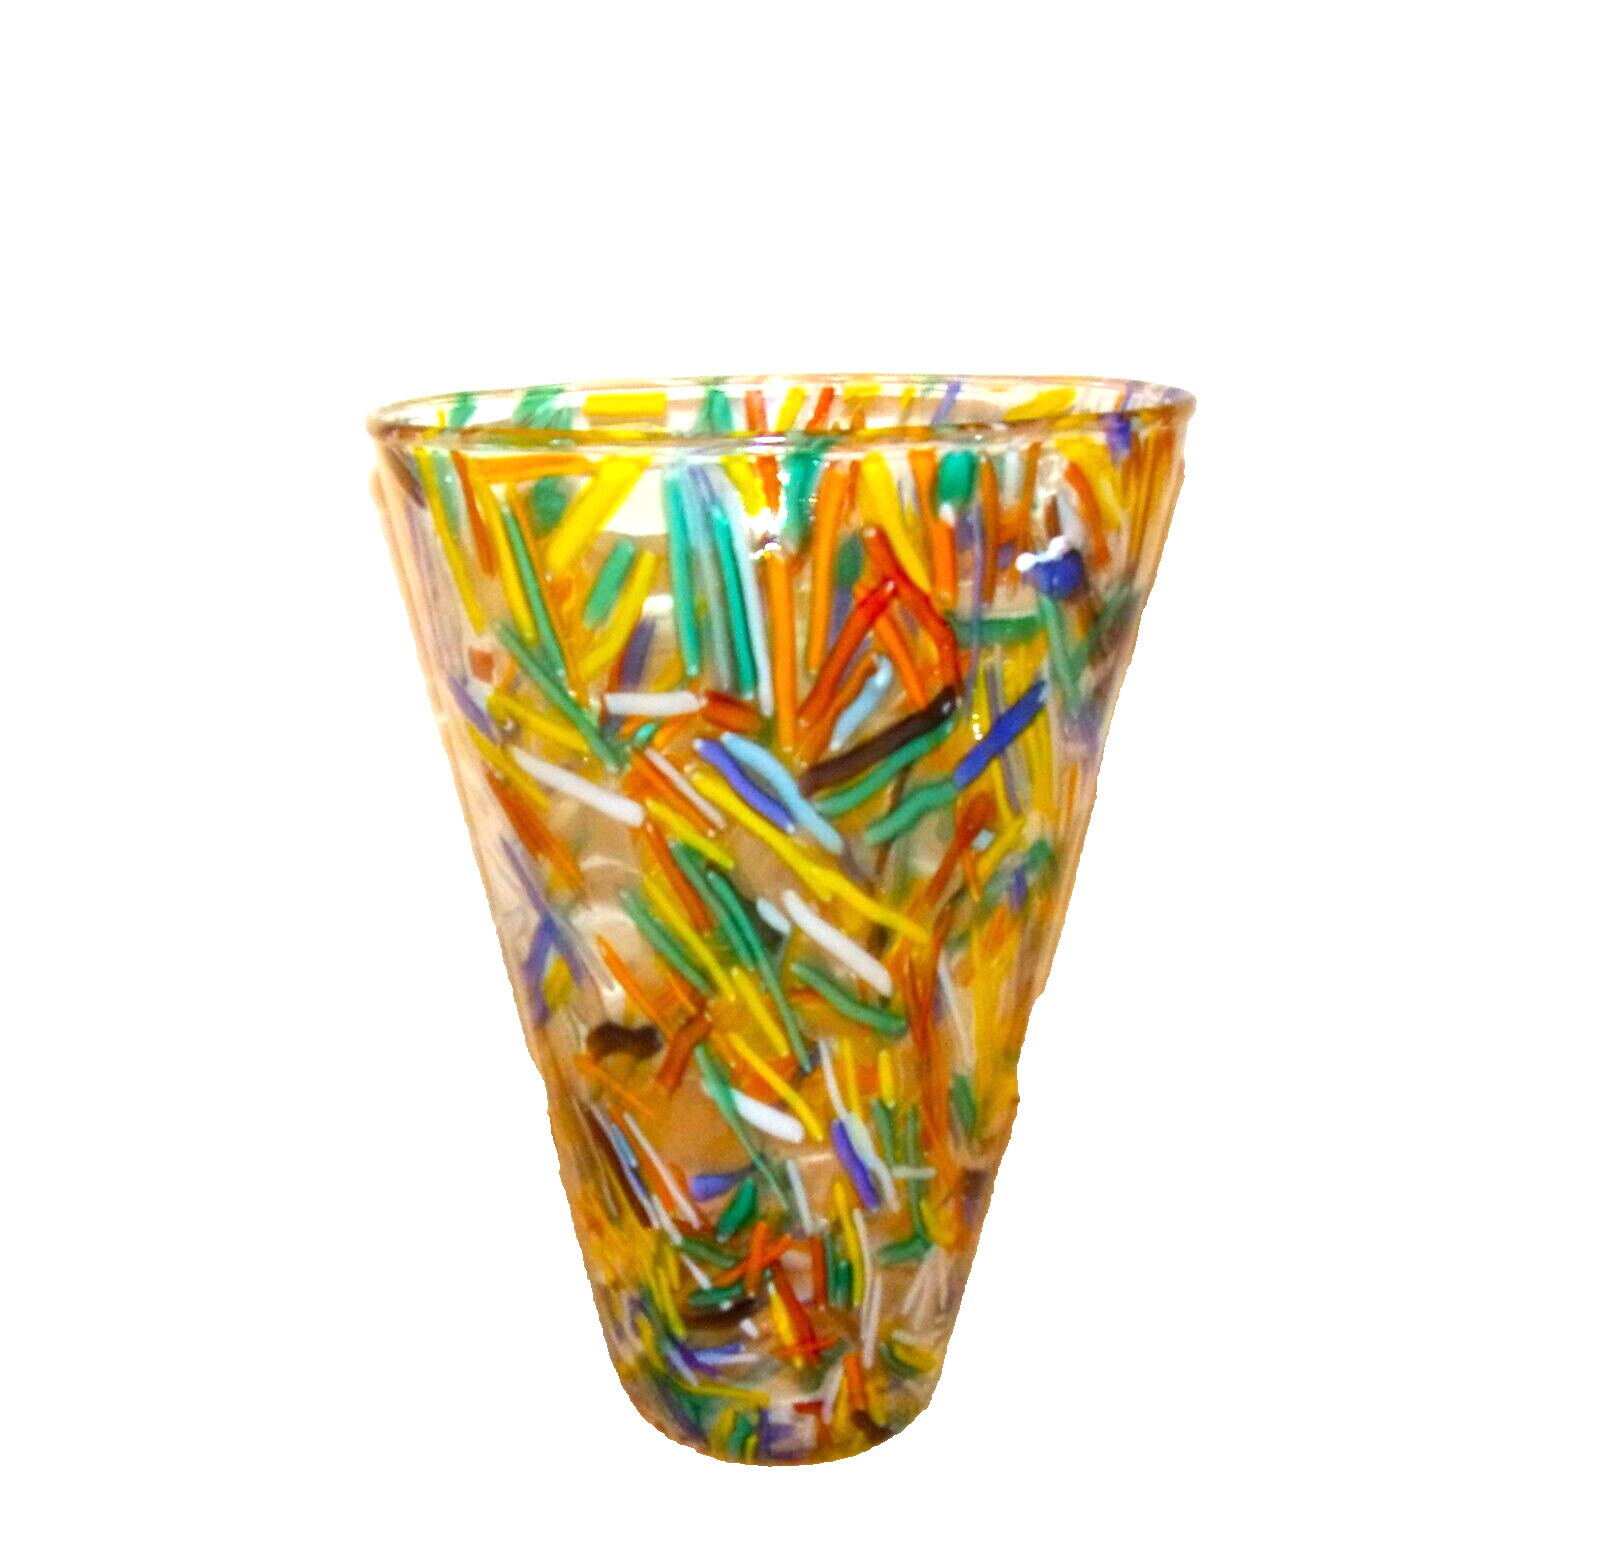 Large Colorful Blown Glass Confetti Vase w/Wide Mouth: Made by Pier One Imports